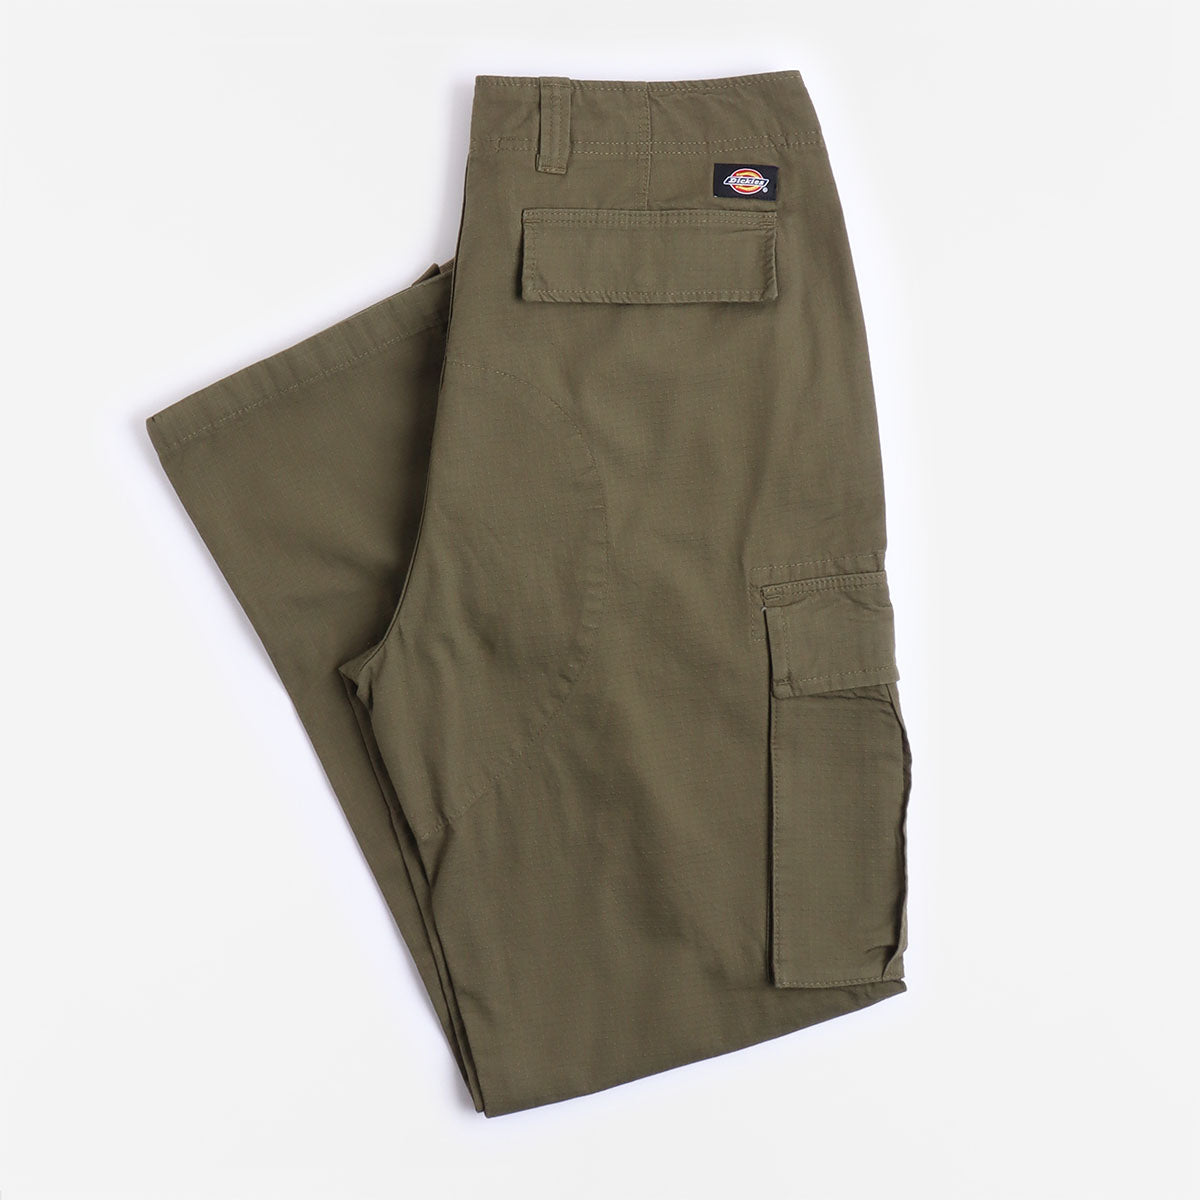 DICKIES - Men's Eagle Bend cargo trousers - green - DK0A4X9XMGR